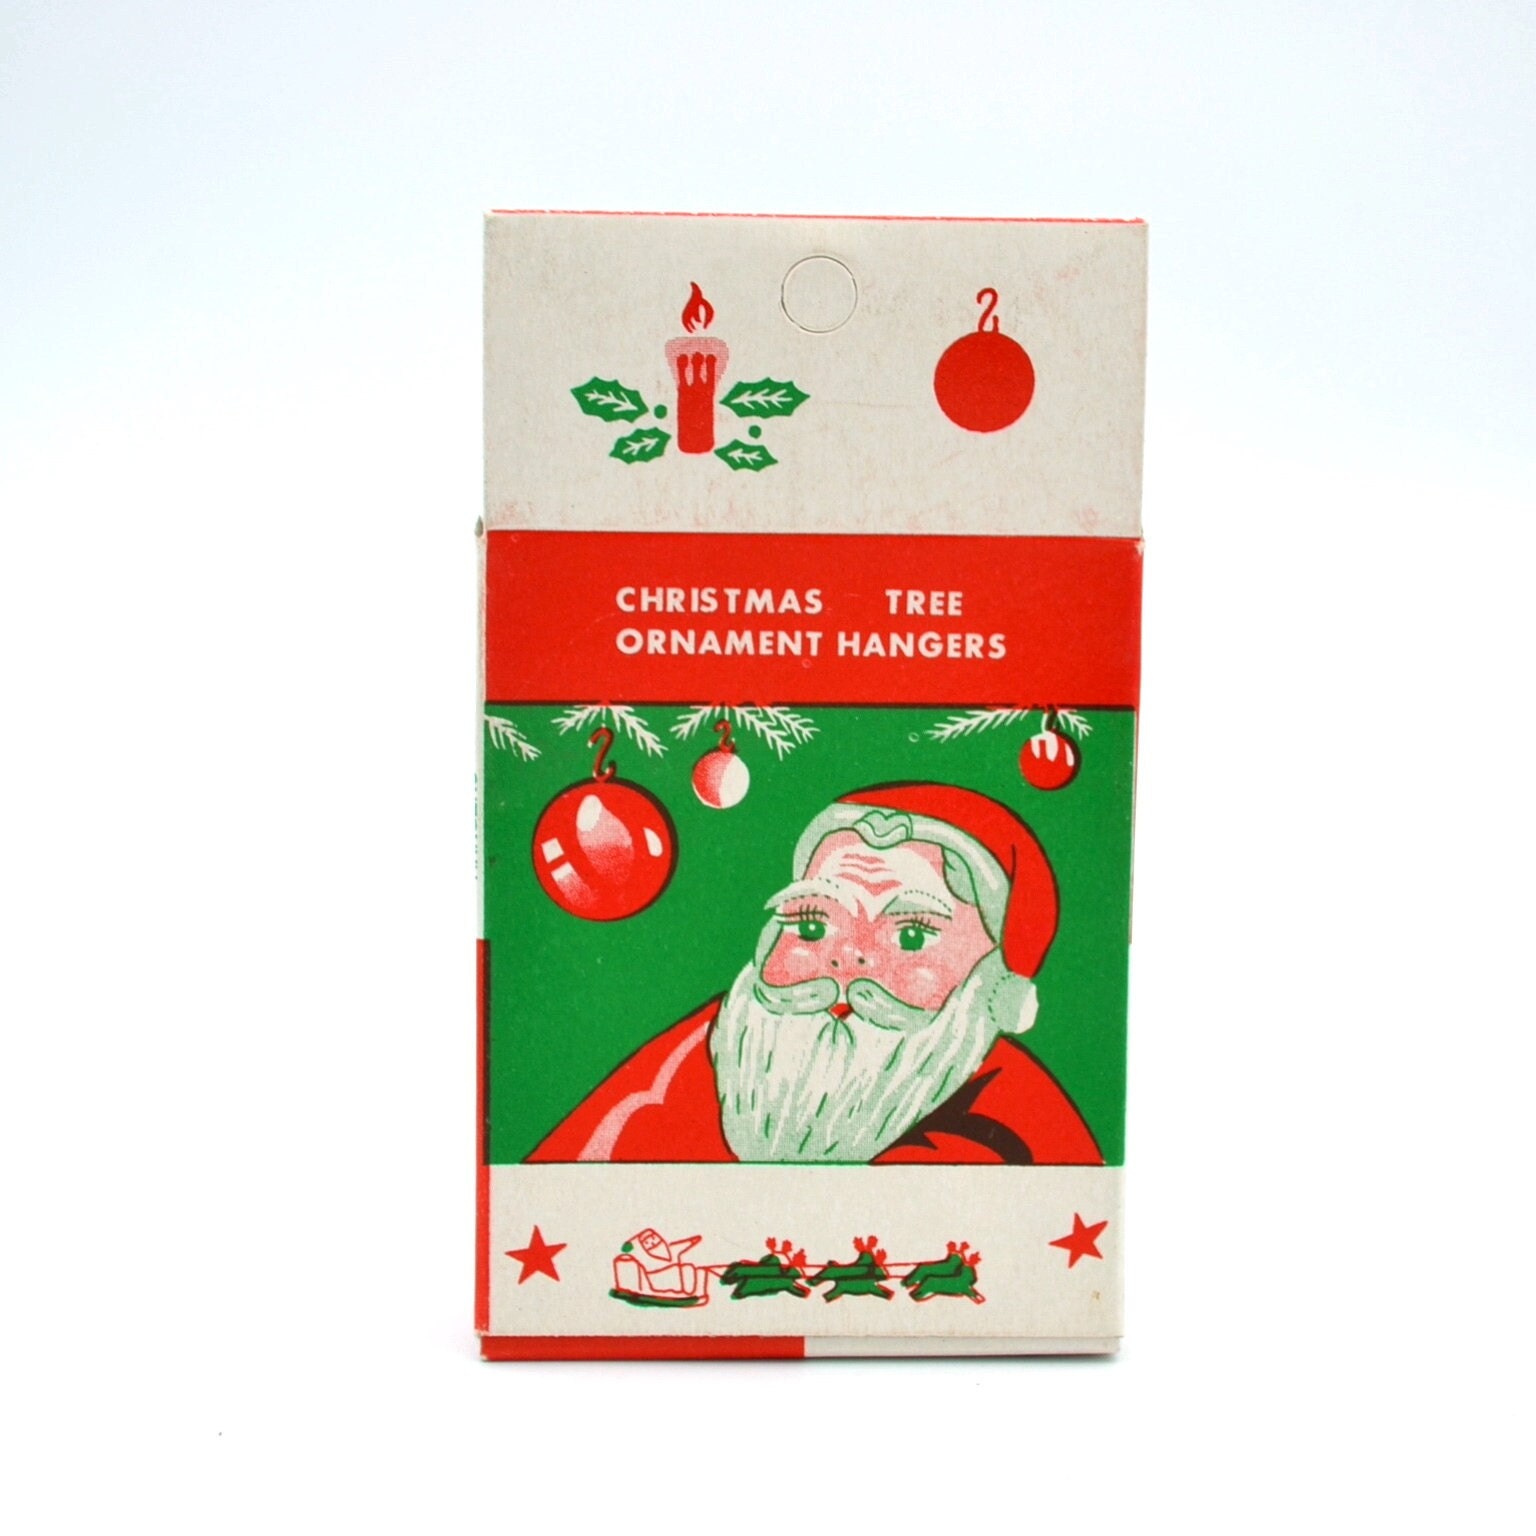 Vintage Christmas Ornament Hooks in Box - Front and Back Santa Claus  Graphics - NOS Metal Tree Hangers Made in Japan